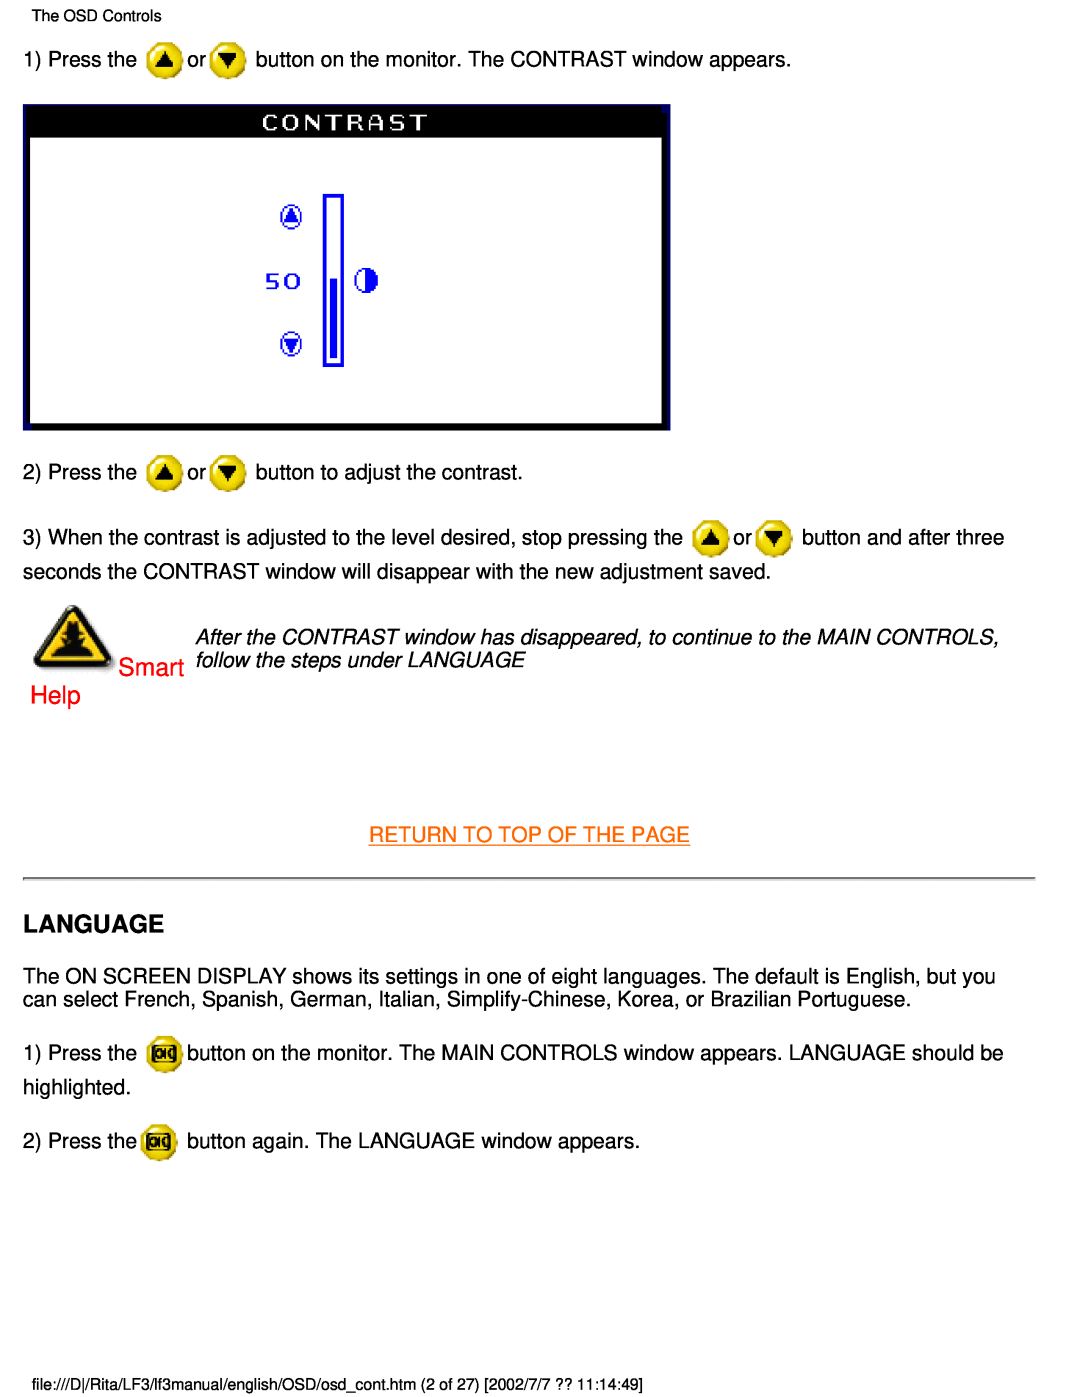 Philips 170X user manual Language, Help, Return To Top Of The Page 